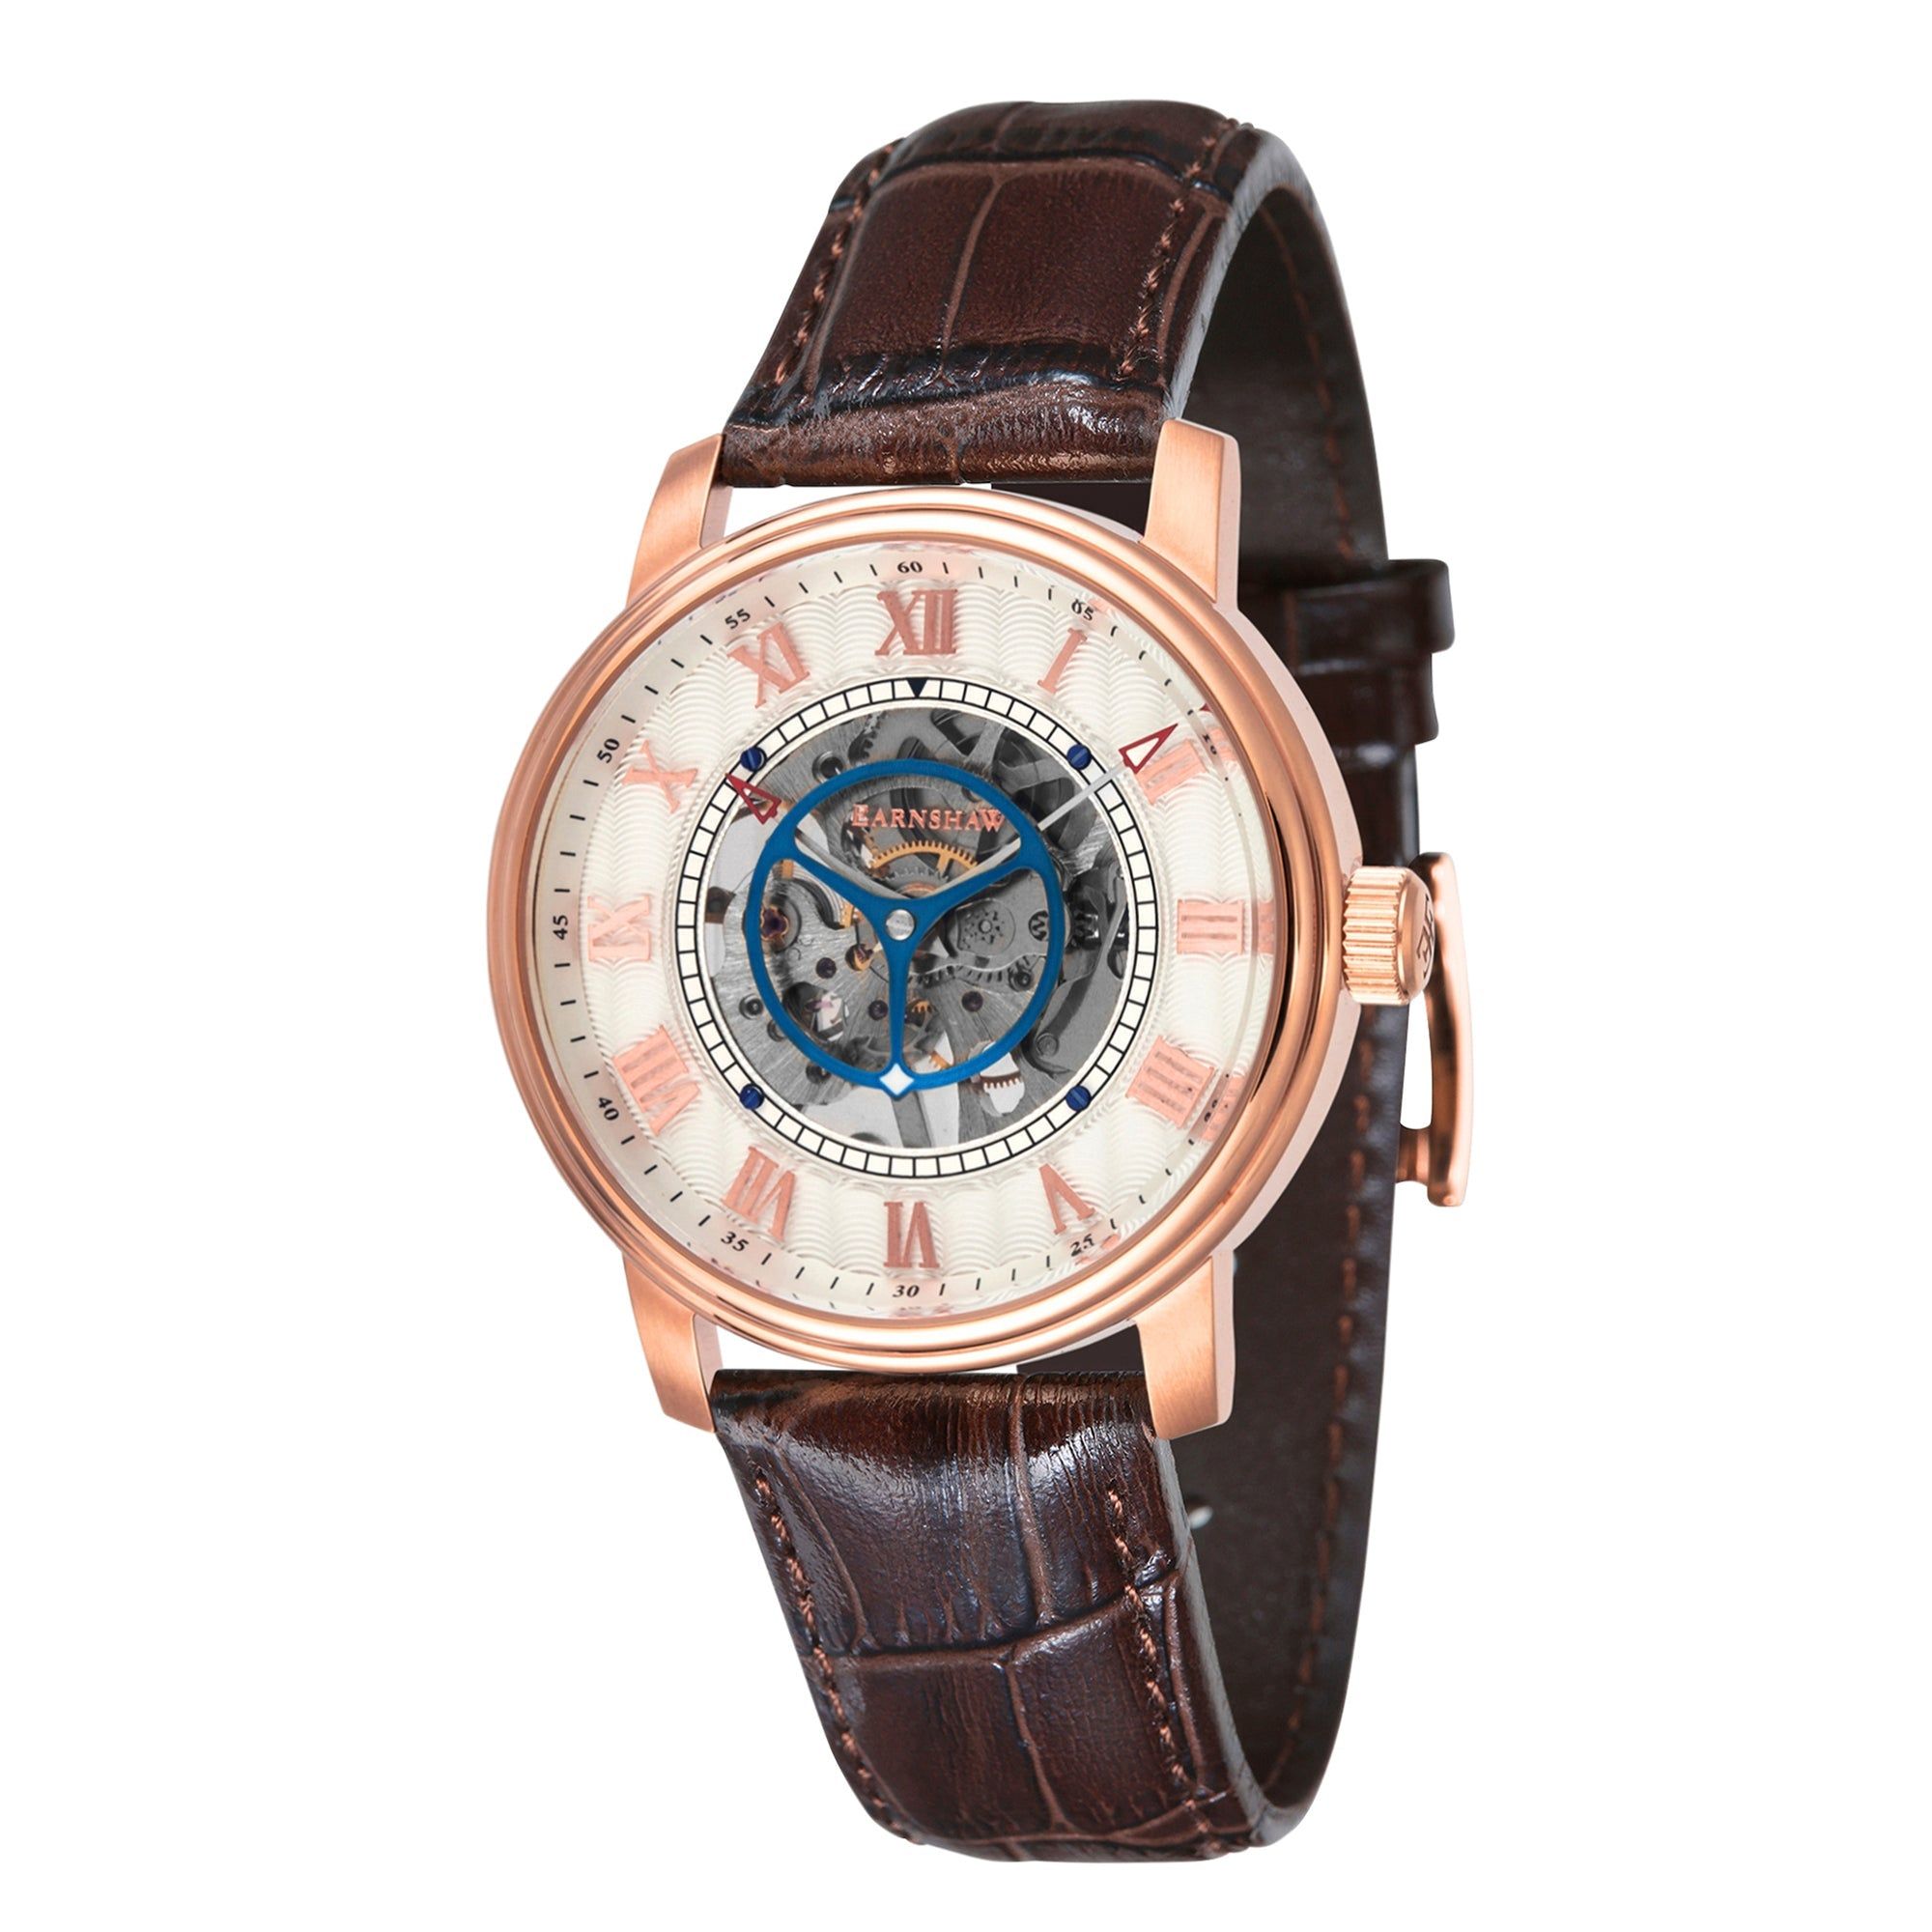 Collection: Westminster  Mechanical Skeleton
Model: Es-8096-03
Movement: Mechanical Skeleton 
Case Material: Stainless Steel
Case Diameter (mm): 42
Case Thickness (mm): 14.5
Case Shape: Round
Case Color: Rose Gold
Dial Color: Silver White
Band: Genuine Leather Strap
Band Color: Brown
Buckle: Strap Buckle
Band Width (mm): 22
Water Resistance: 5 Atm
Watch Weight (g): 100
Warranty: 2 Years International Warranty